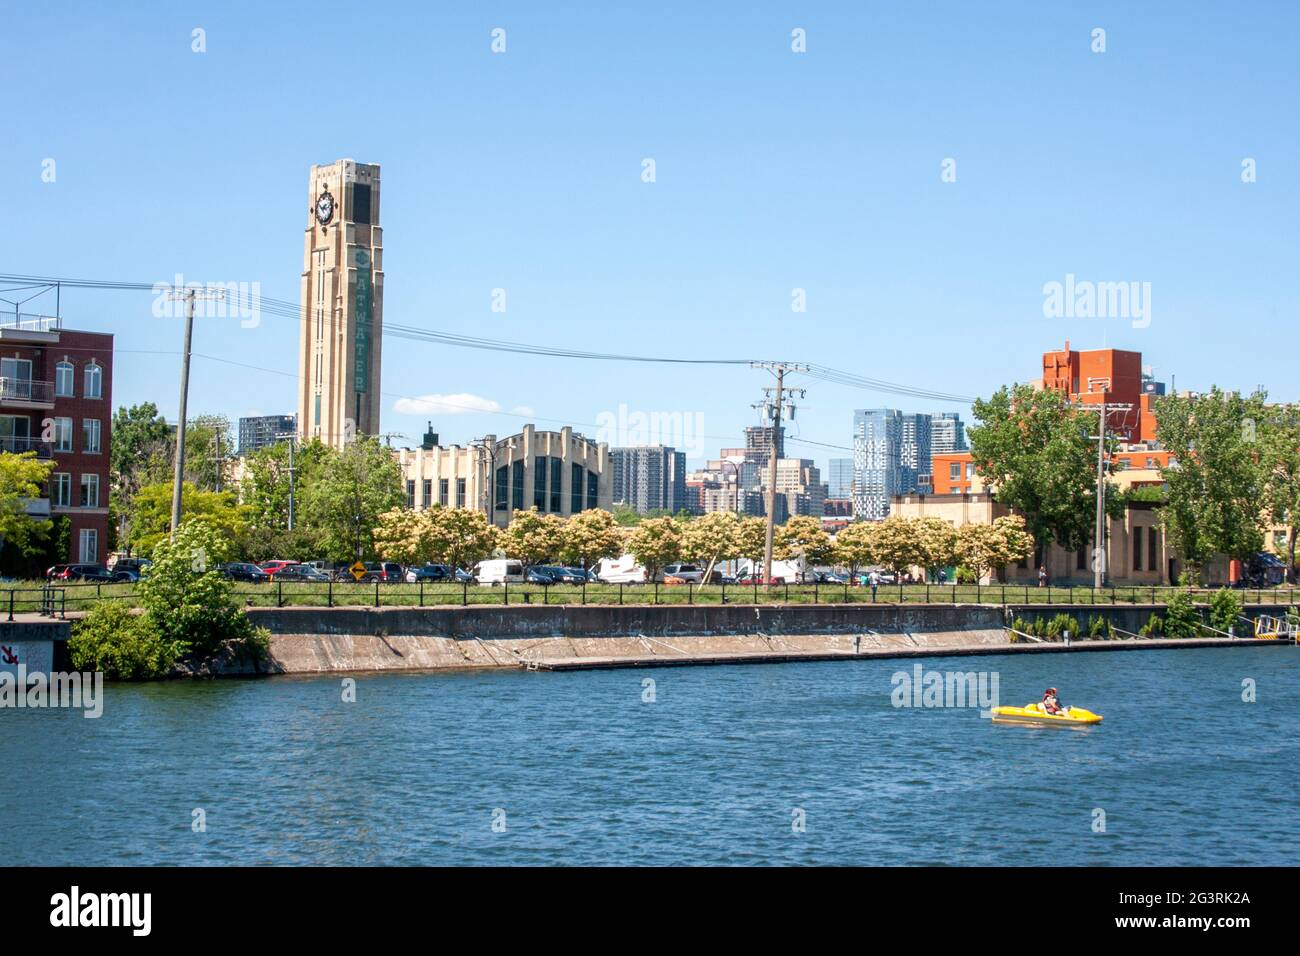 A pedalo in the Lachine Canal in front of Montreal's Atwater Market Stock Photo